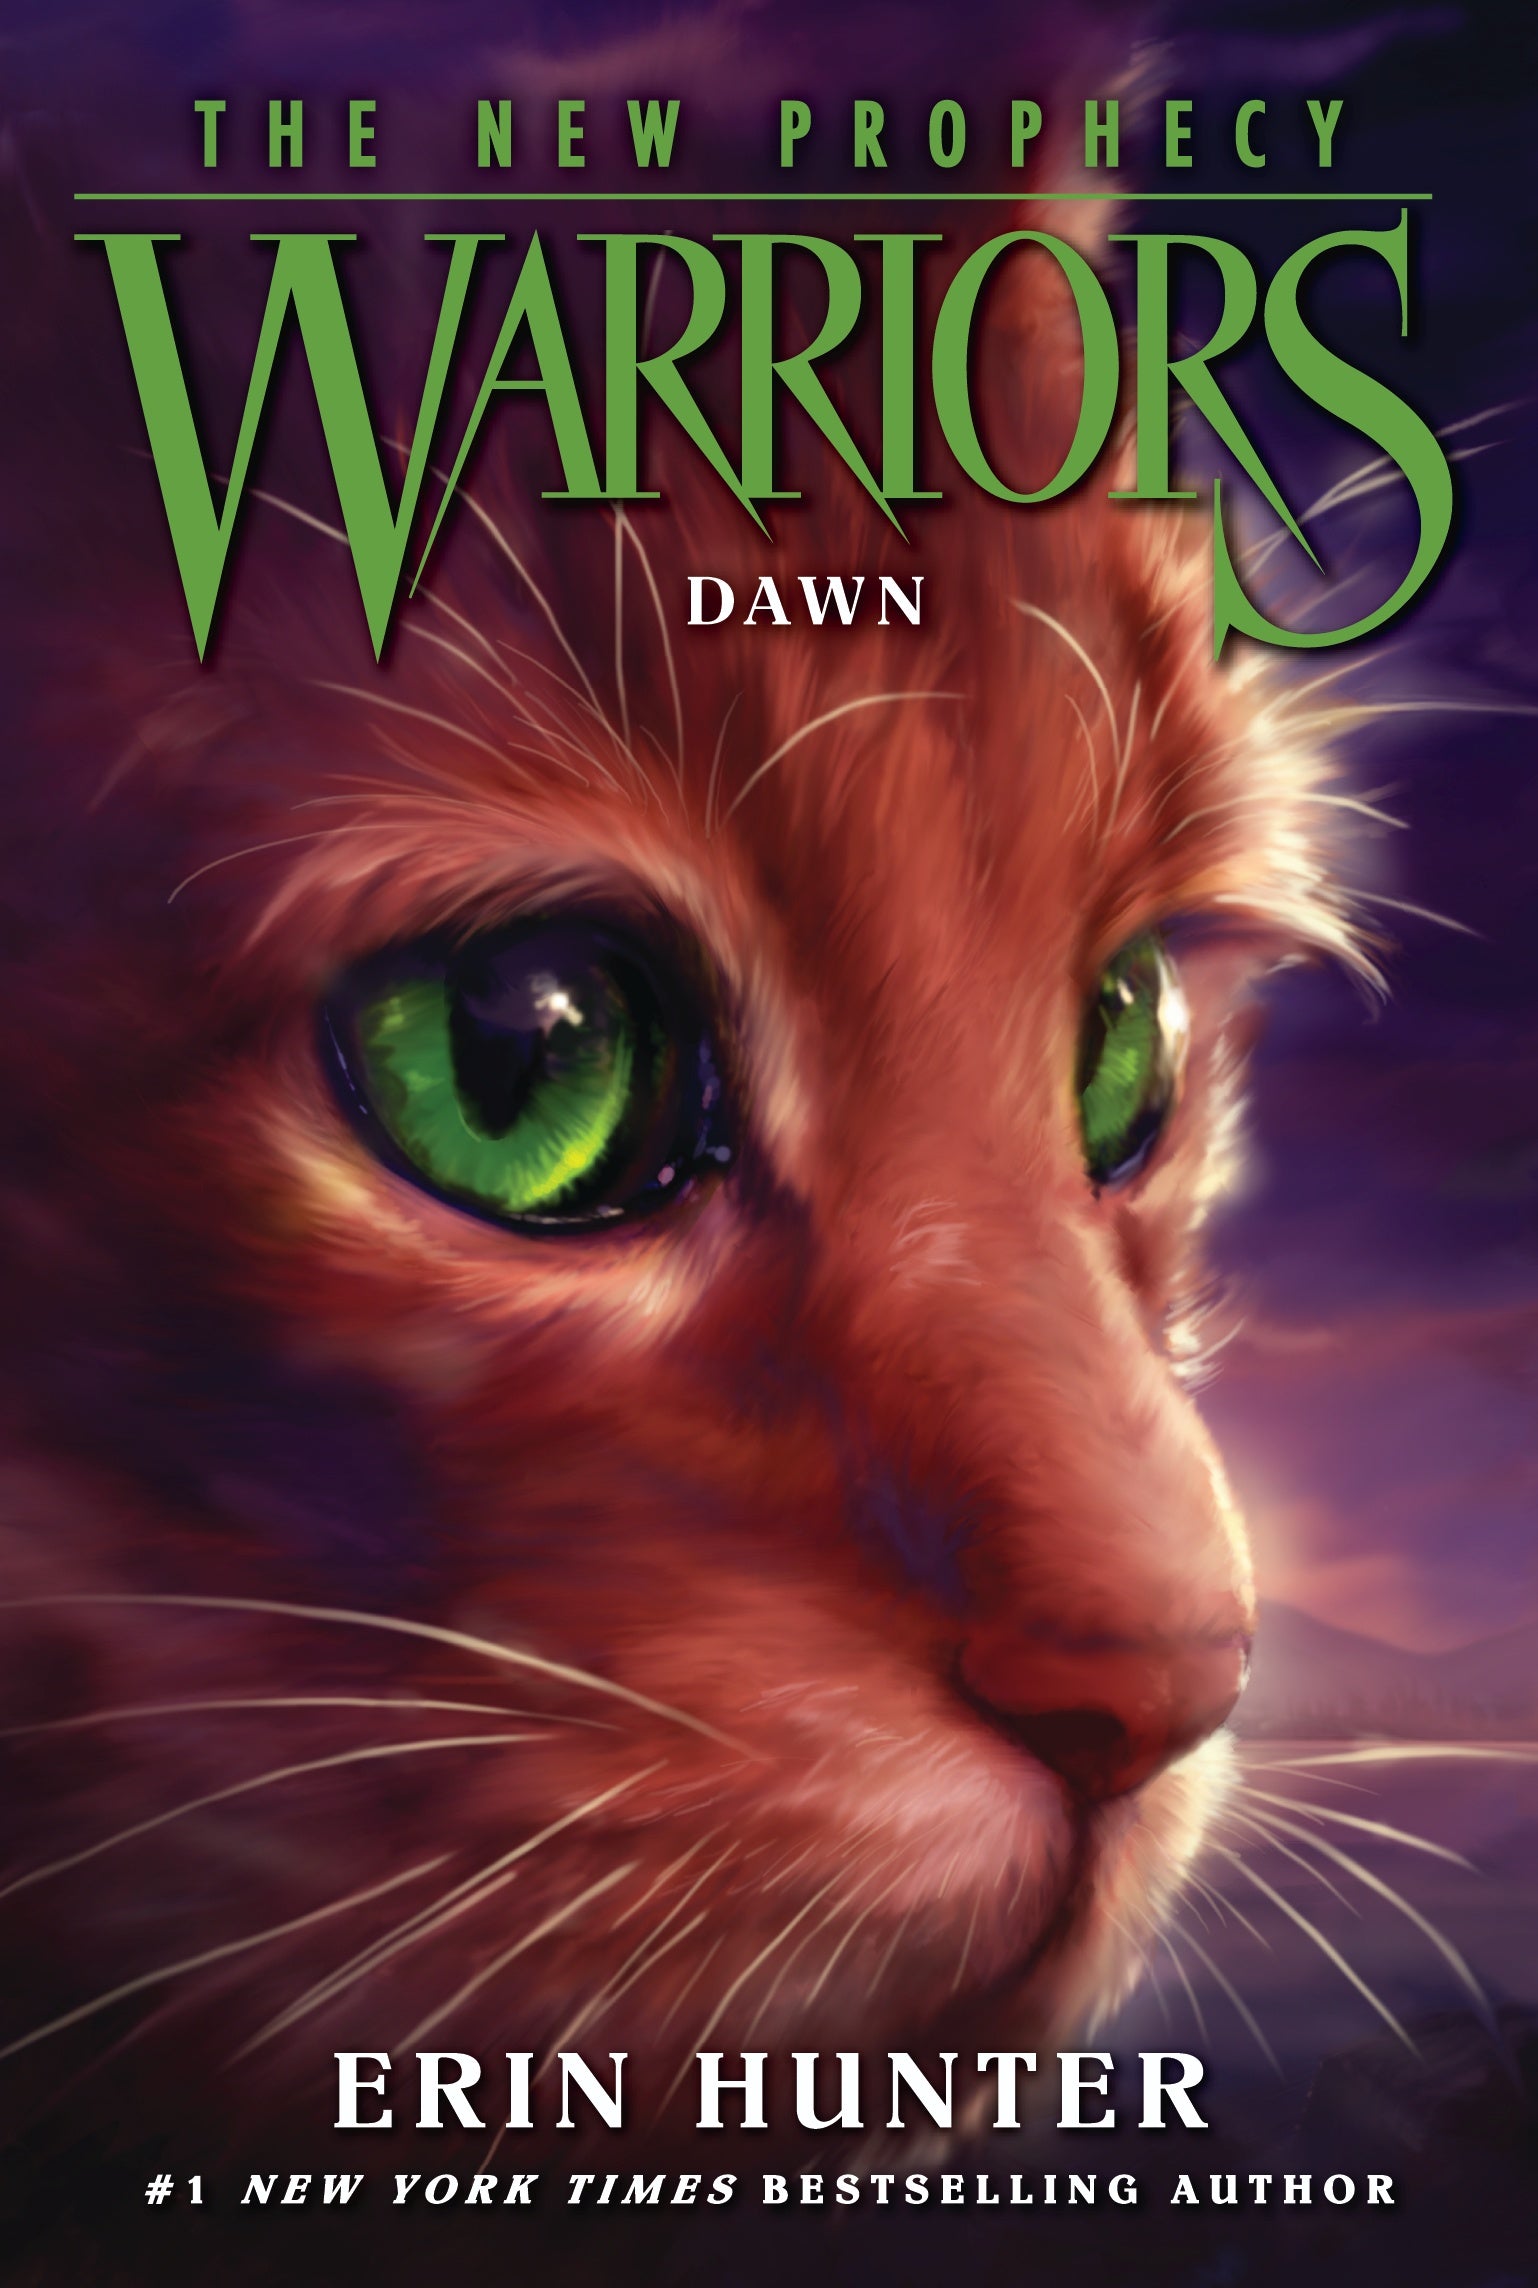 Warrior cats by Erin Hunter, Paperback